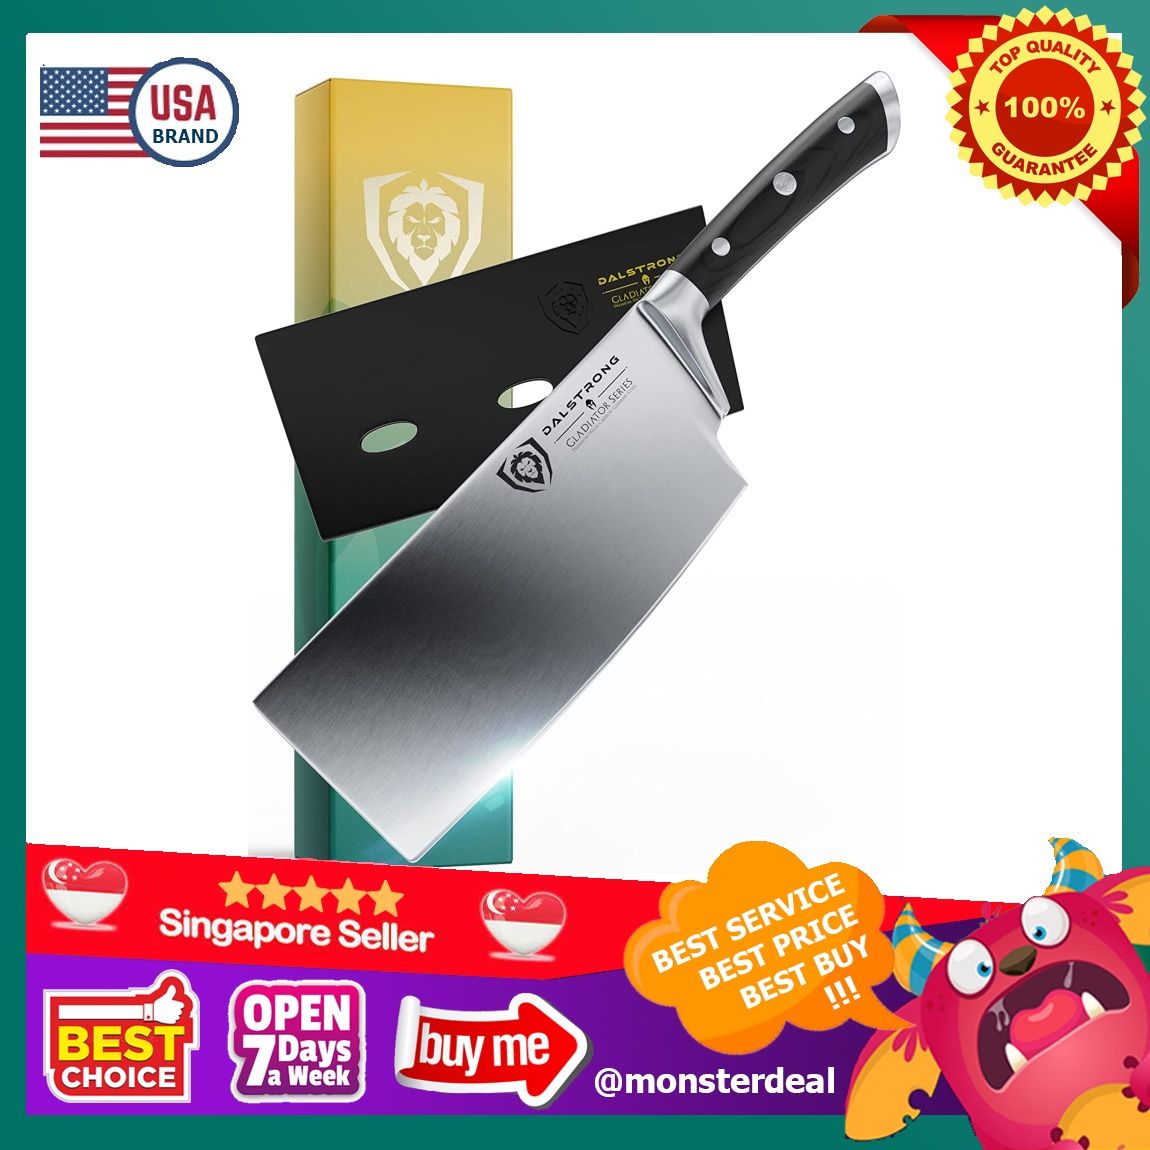 https://media.karousell.com/media/photos/products/2022/11/19/ybr_dalstrong_cleaver_butcher__1668883358_59b70c6a_progressive